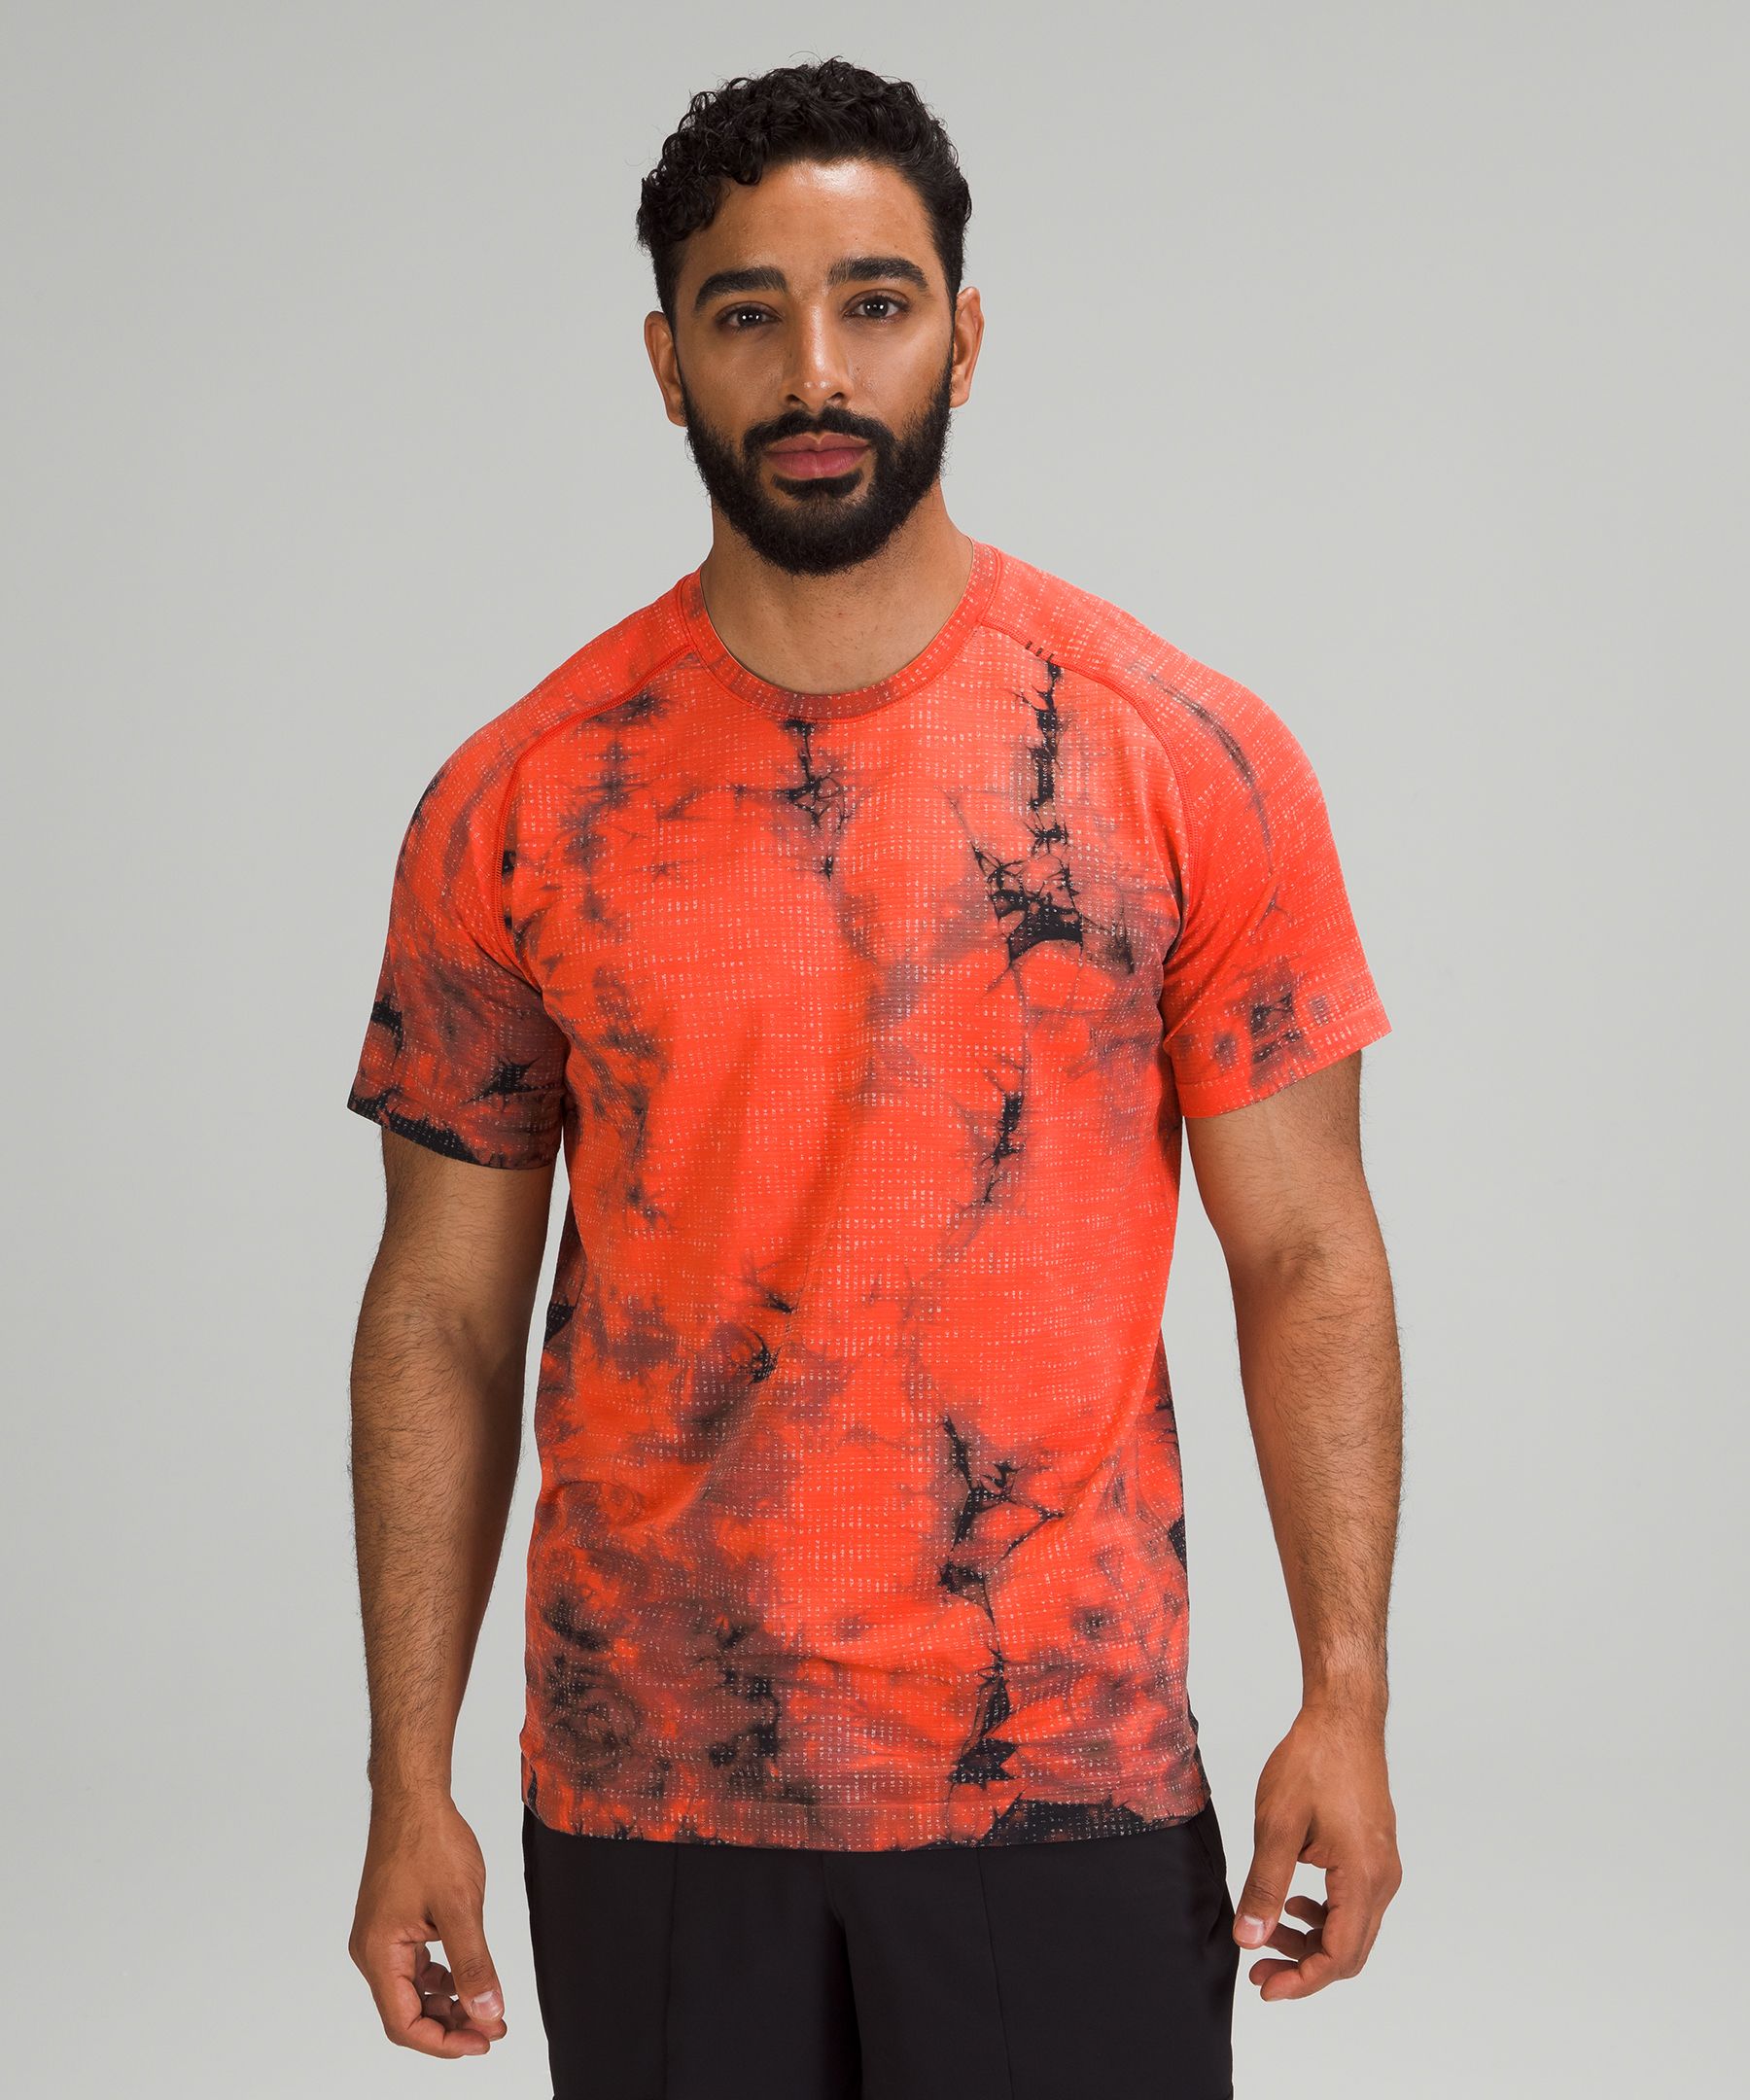 Lululemon Metal Vent Tech T-shirt 2.0 In Disconnect Marble Dye Autumn Red/graphite Grey